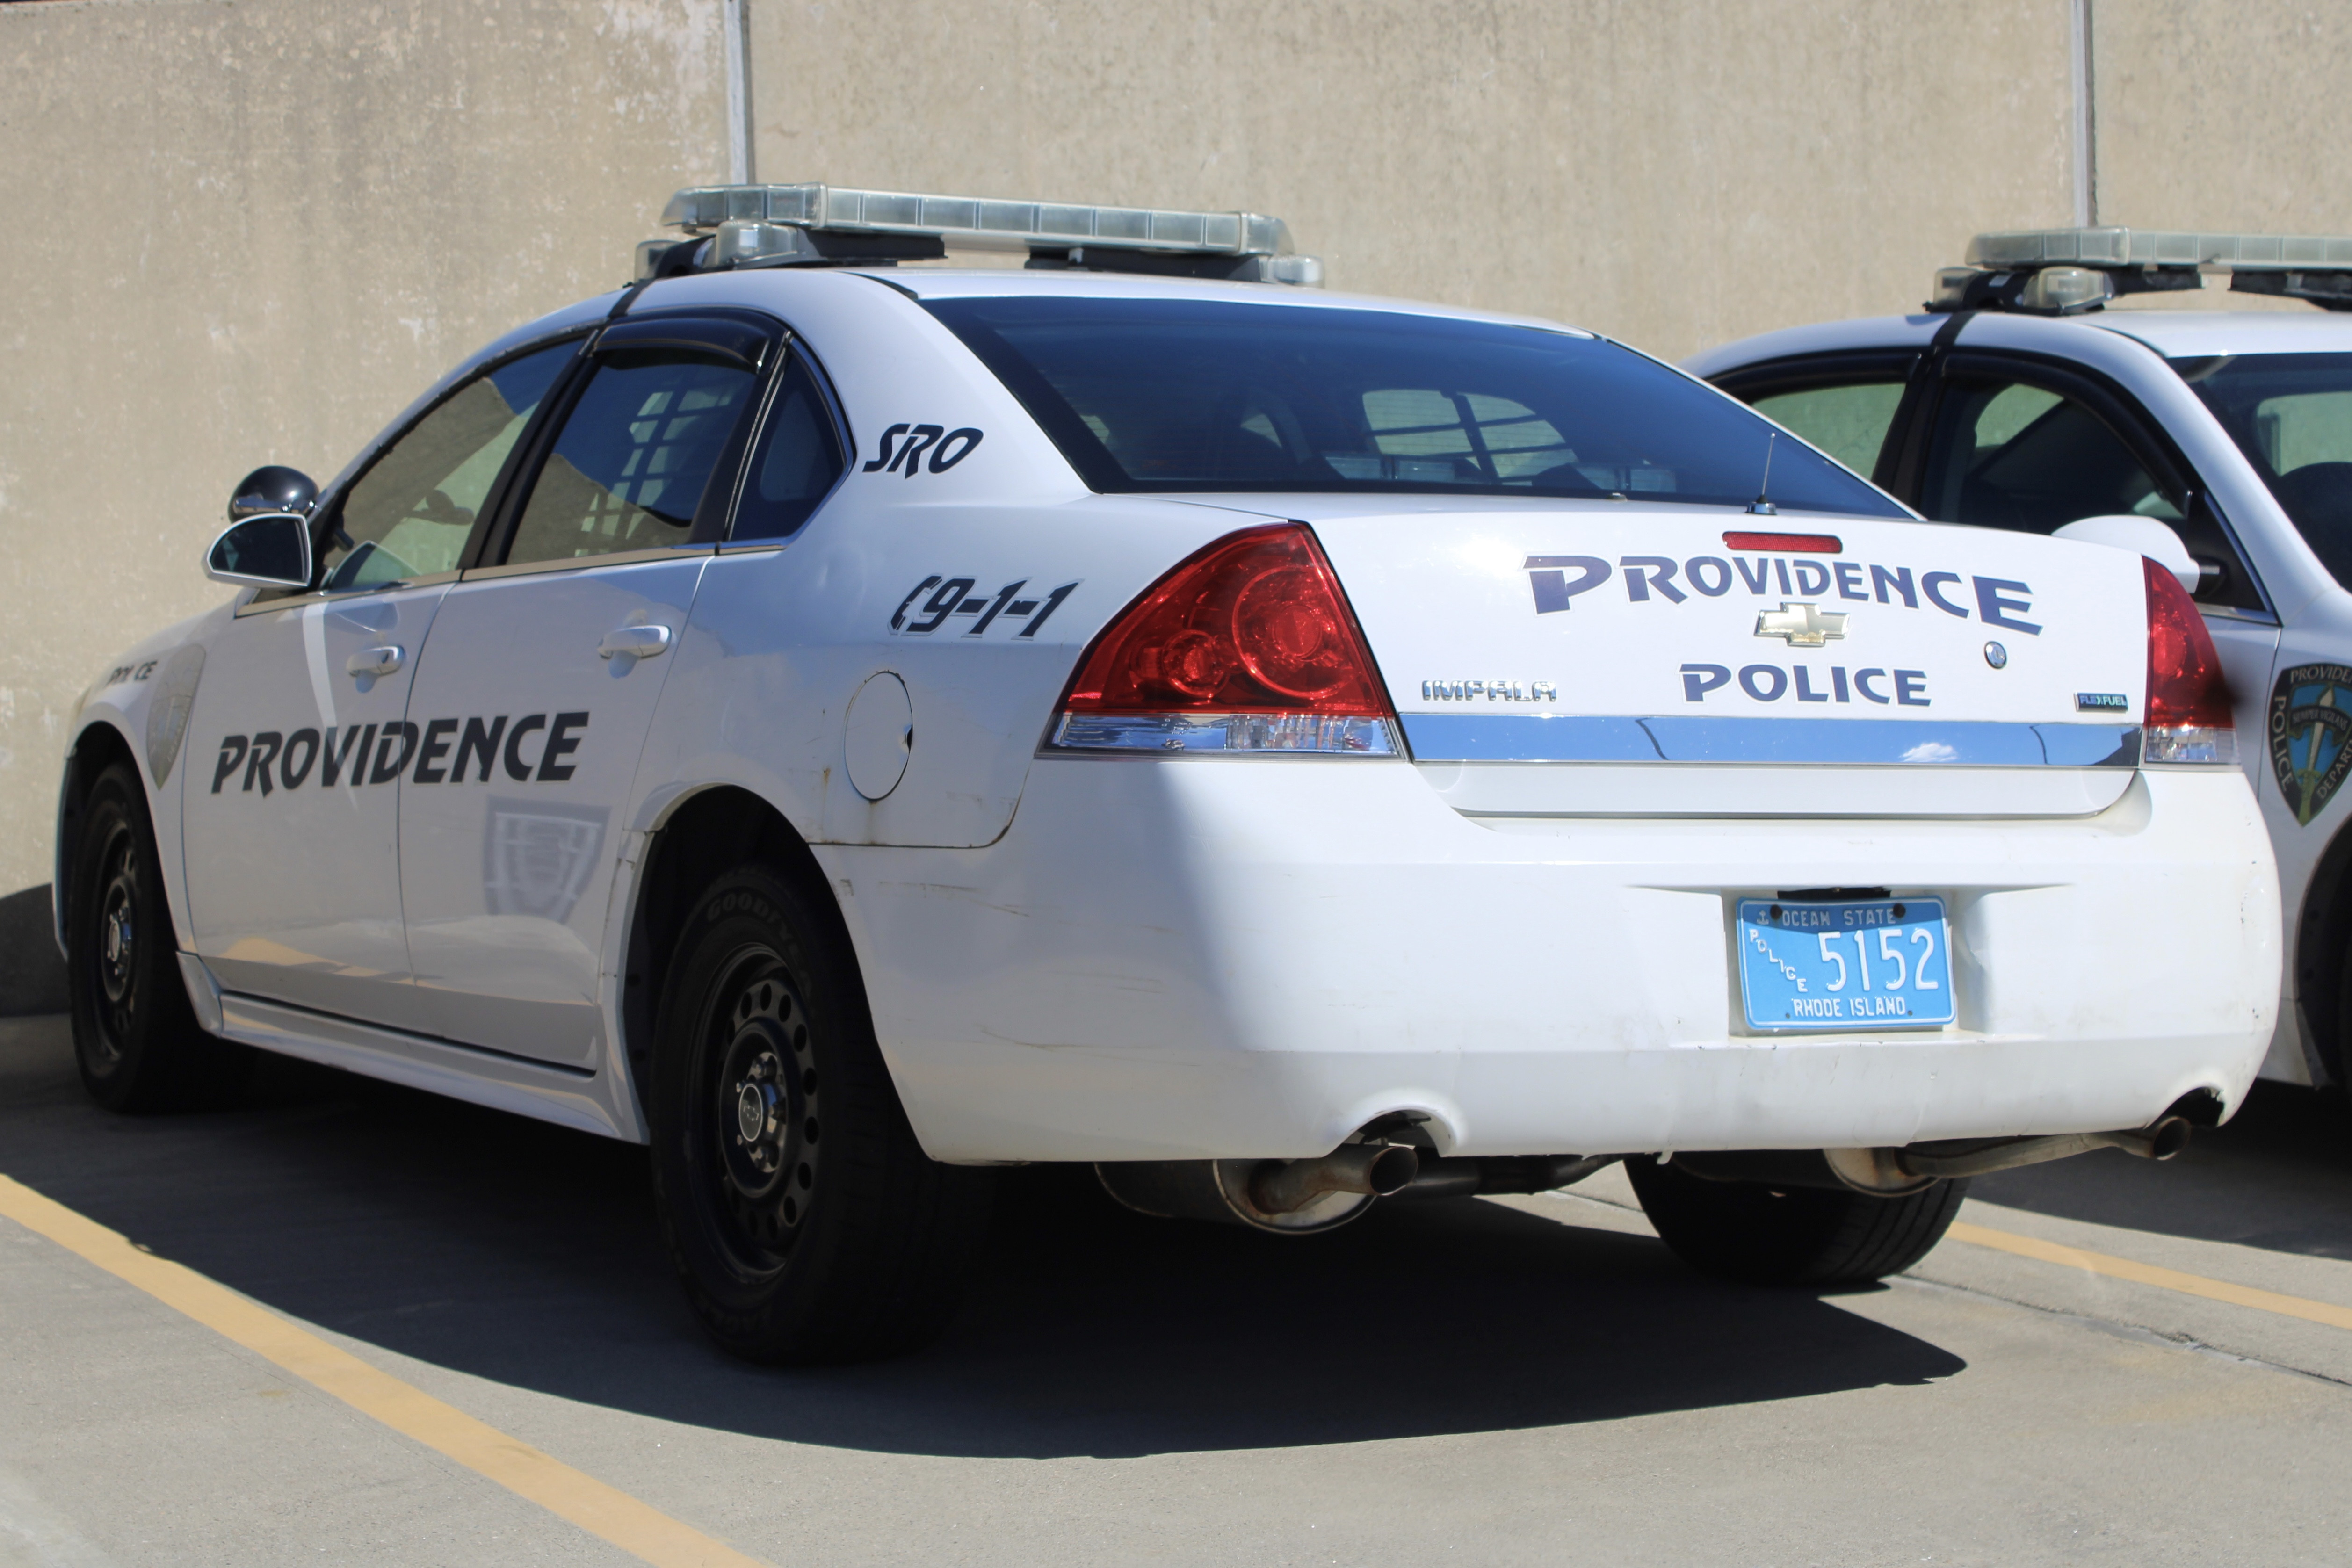 A photo  of Providence Police
            Cruiser 5152, a 2006-2013 Chevrolet Impala             taken by @riemergencyvehicles